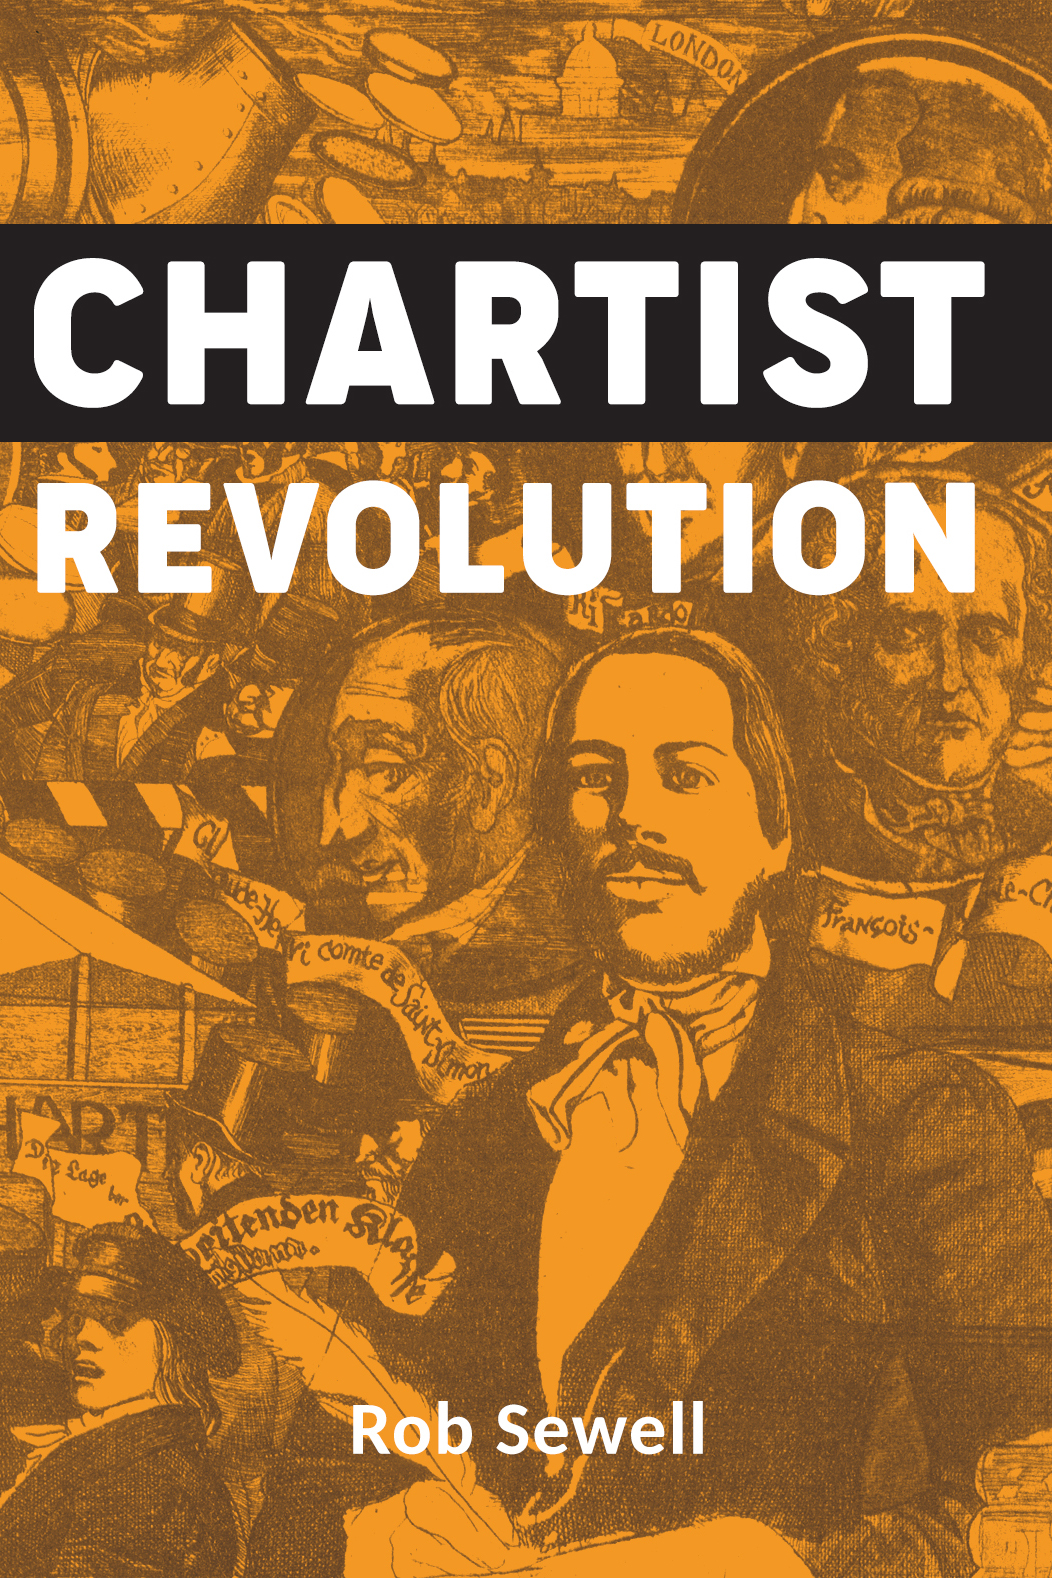 Chartist Revolution by Rob Sewell